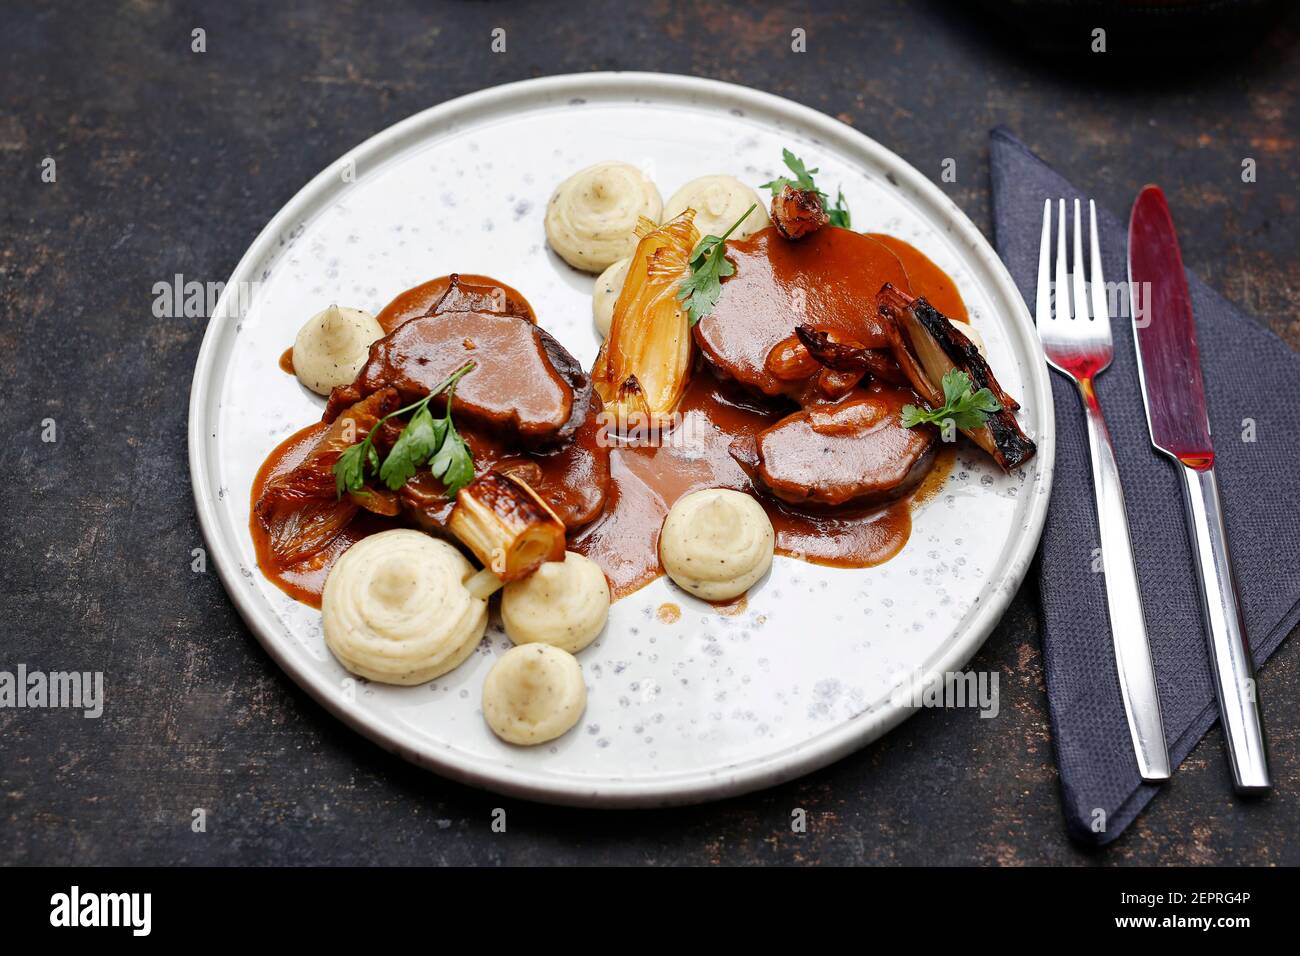 dinner. Meat in gravy with white vegetable puree. Food served on a plate, food styling, serving suggestions, culinary photography. Stock Photo